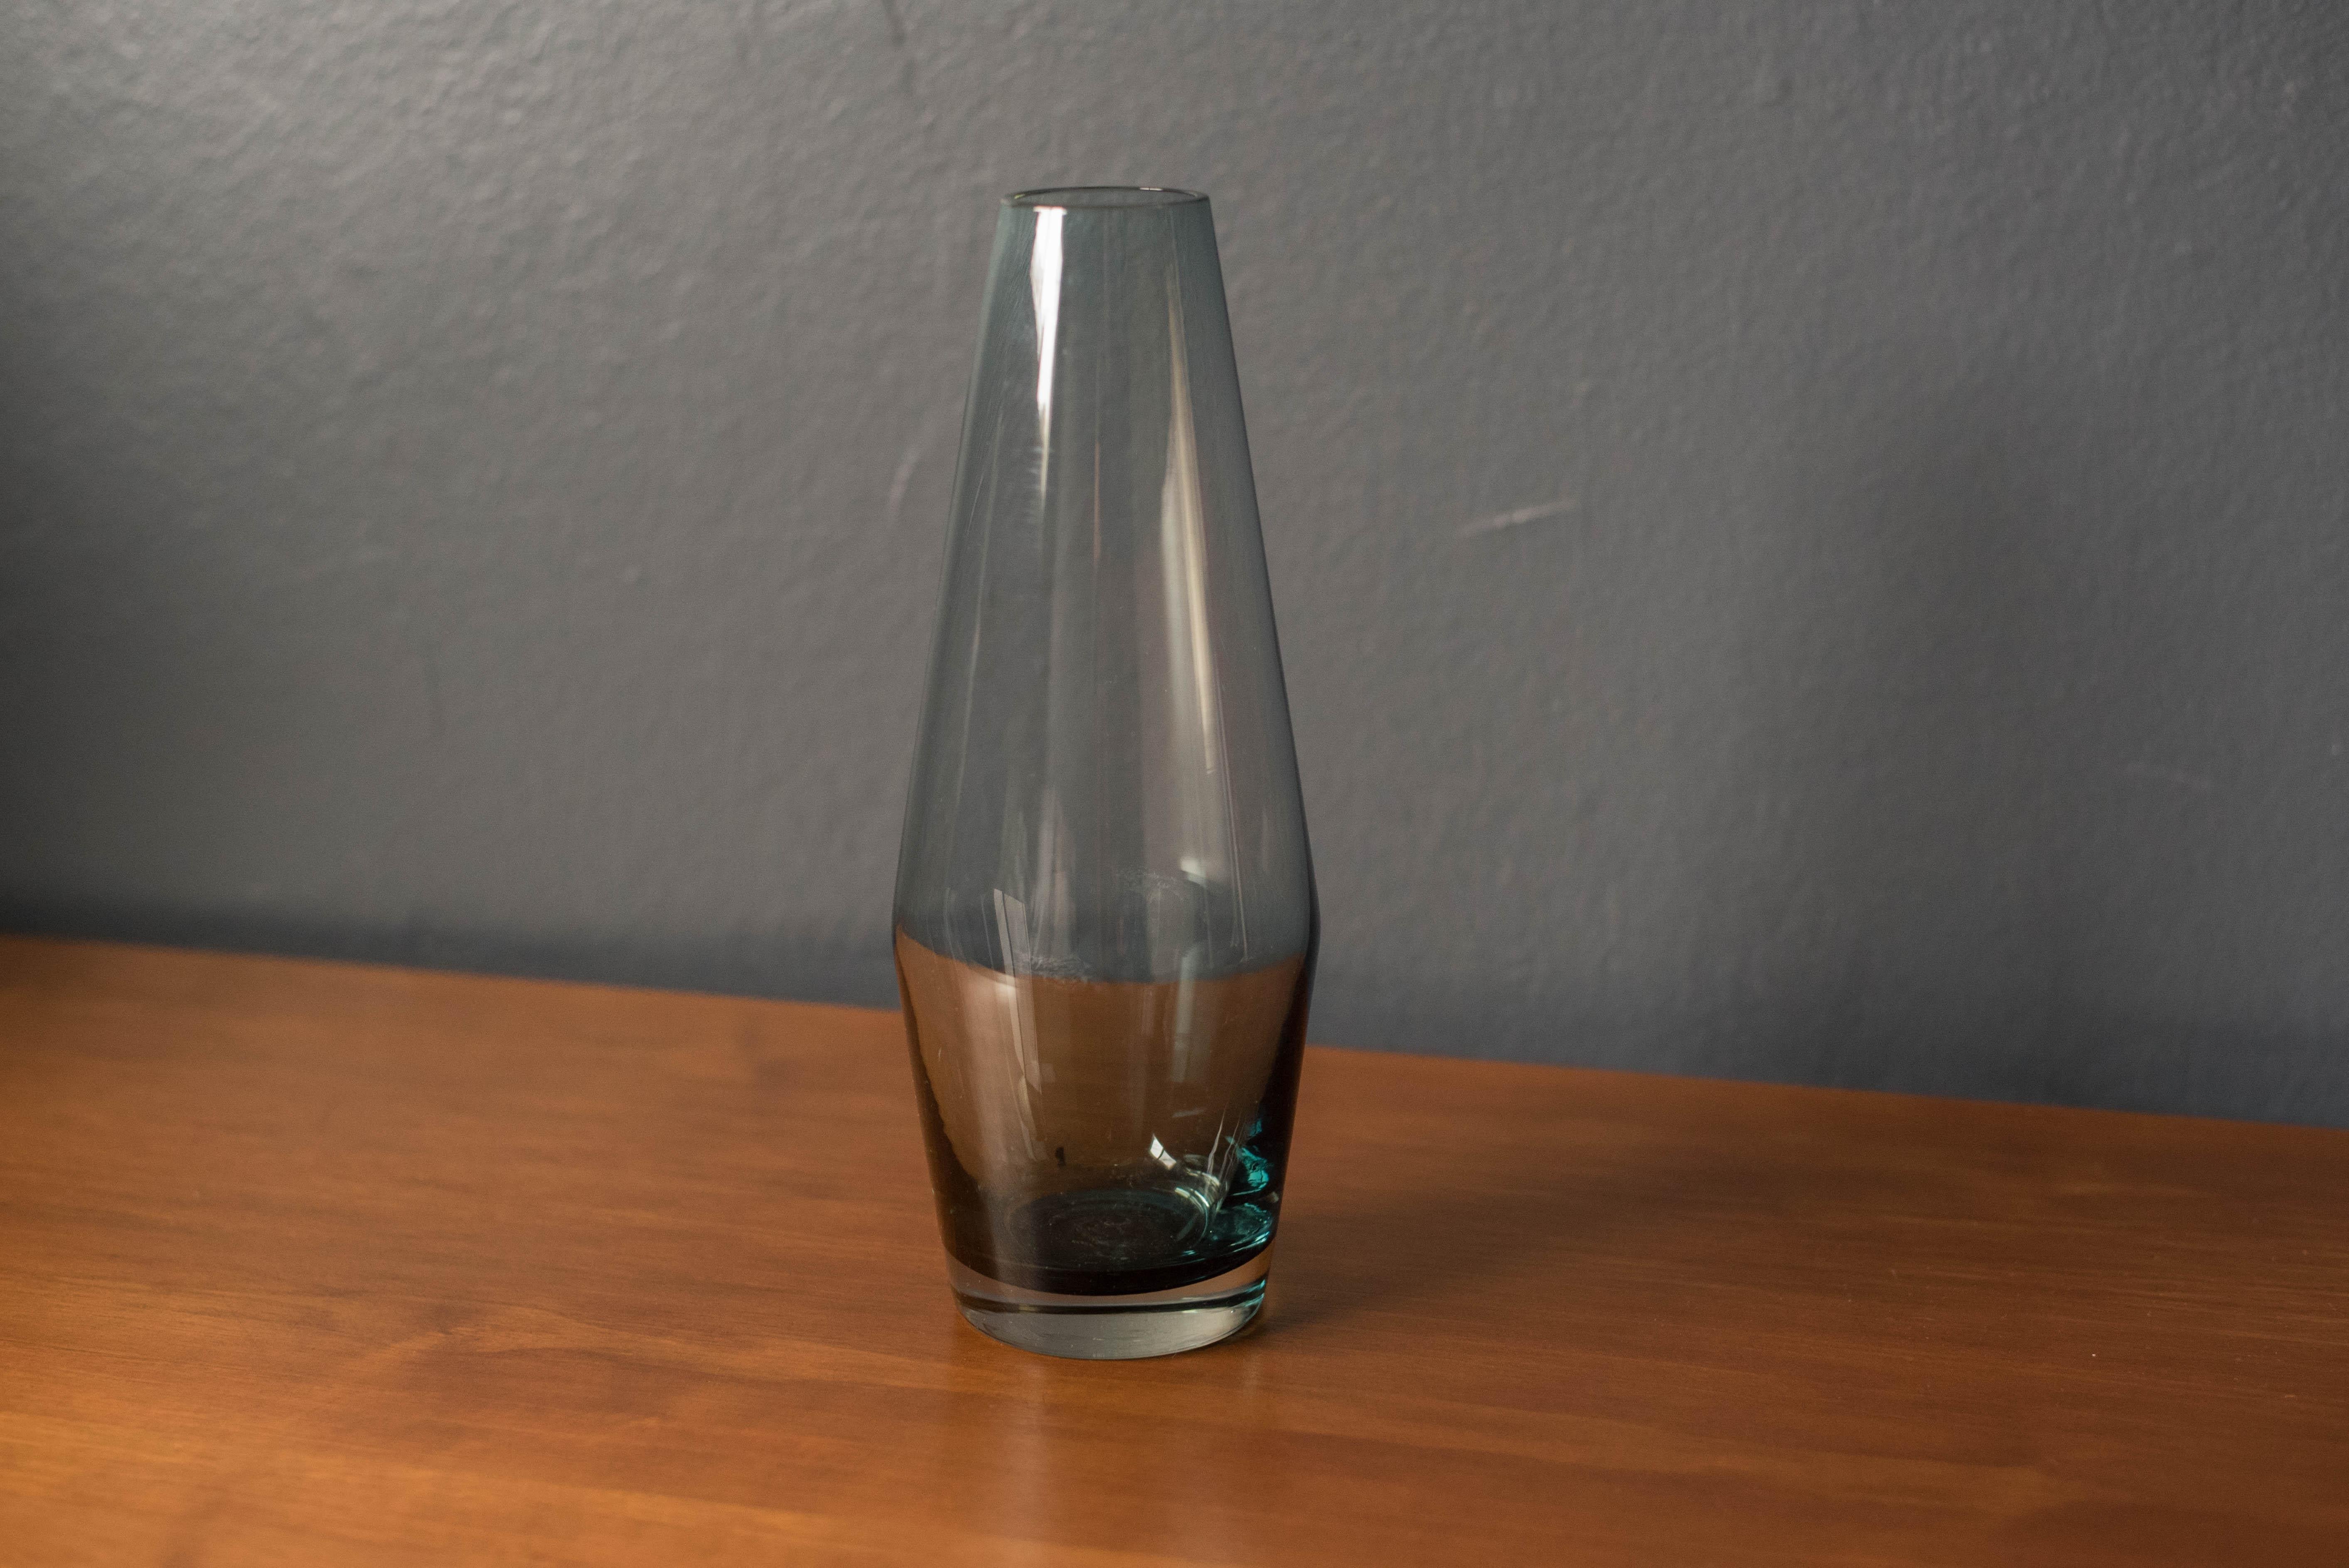 Mid-Century Modern glass bud vase by Riihimaki, Riihimaen Lasi Oy, Finland. This decorative piece has a smokey blue tint with a smooth surface finish.